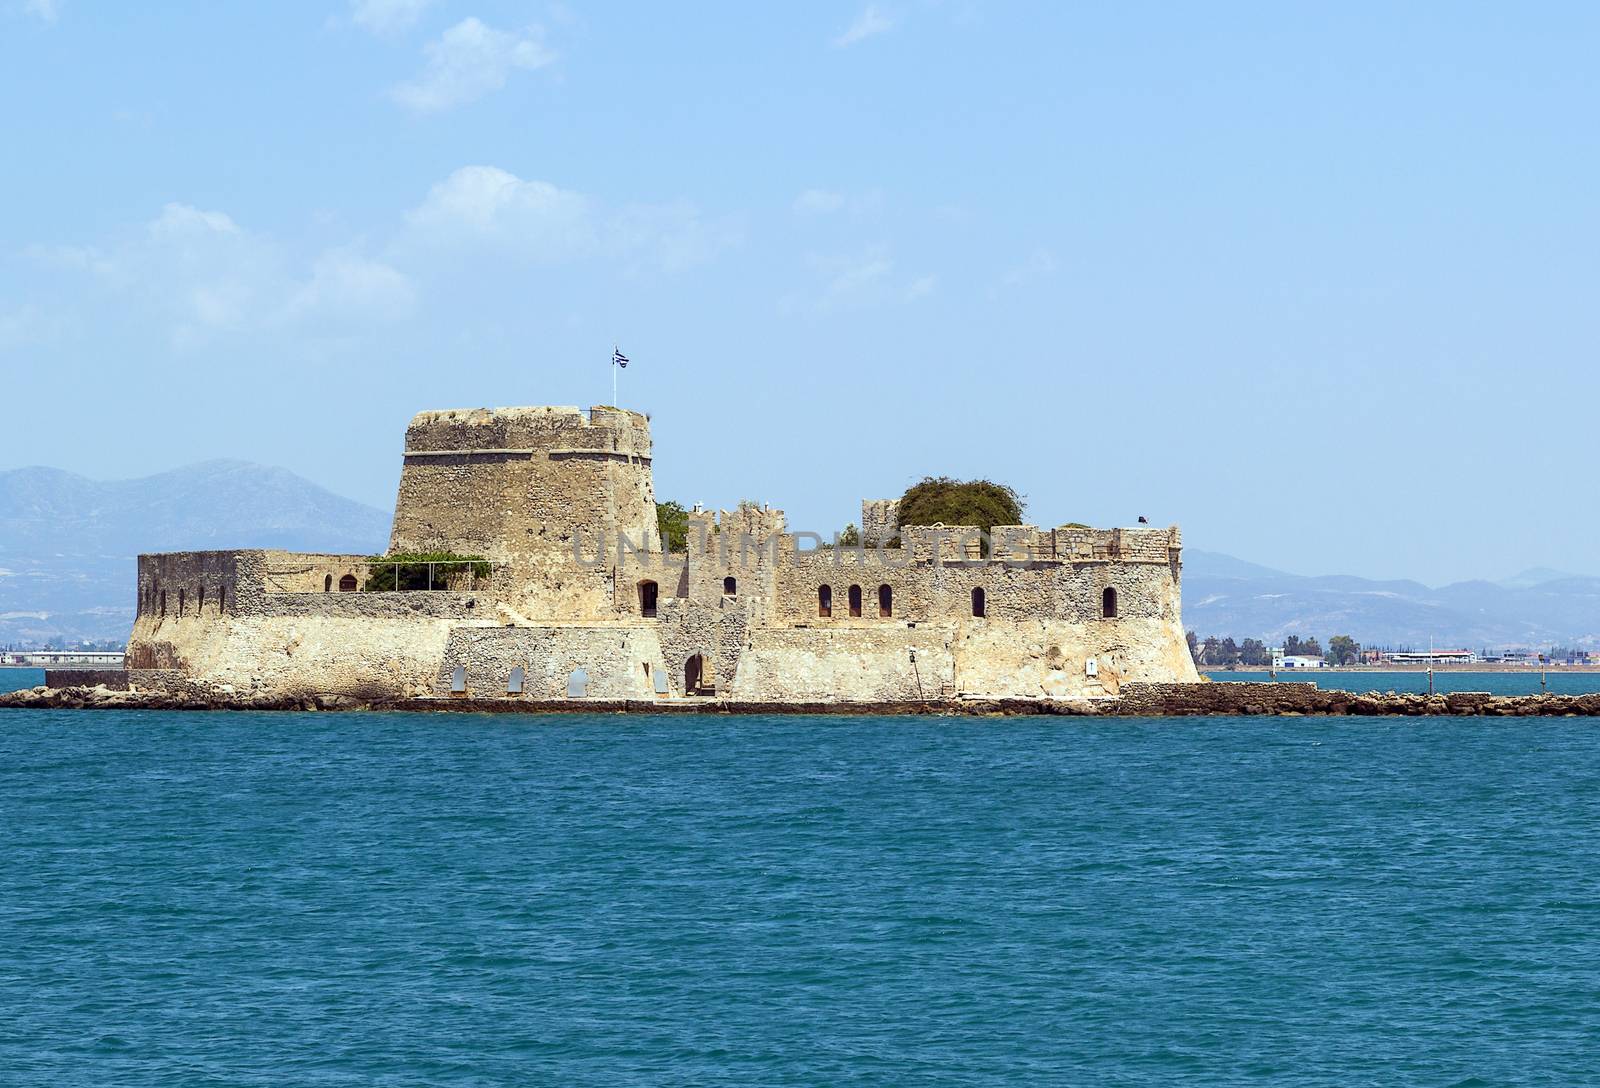 The castle of Bourtzi is located in the middle of the harbour of Nafplio. The Venetians completed its fortification in 1473